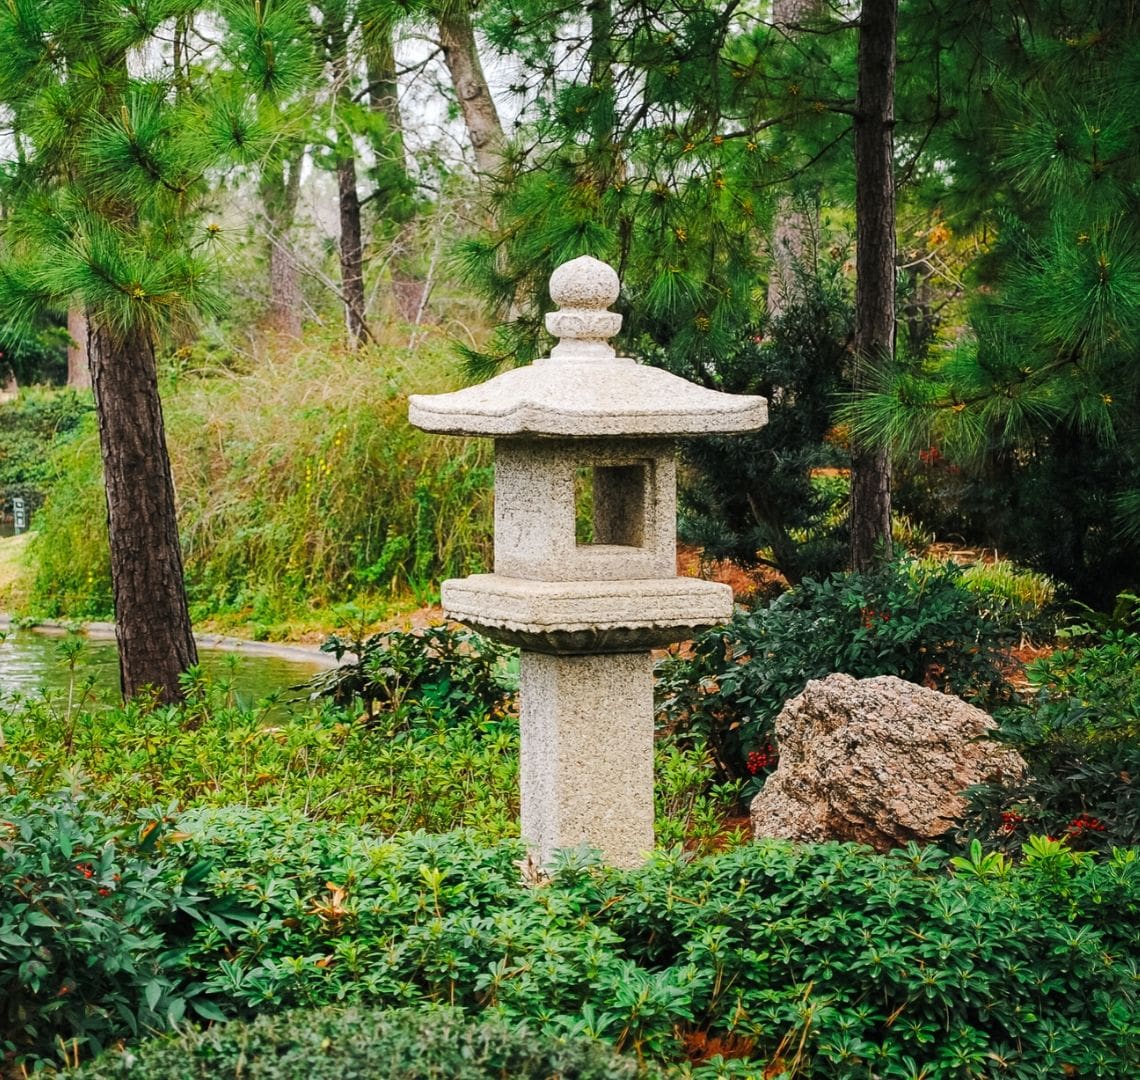 Things To Do In Houston With Kids - a stone bird table in the Japanese Gardens in Hermann Park. The background and foreground are all green (trees, grass, etc)